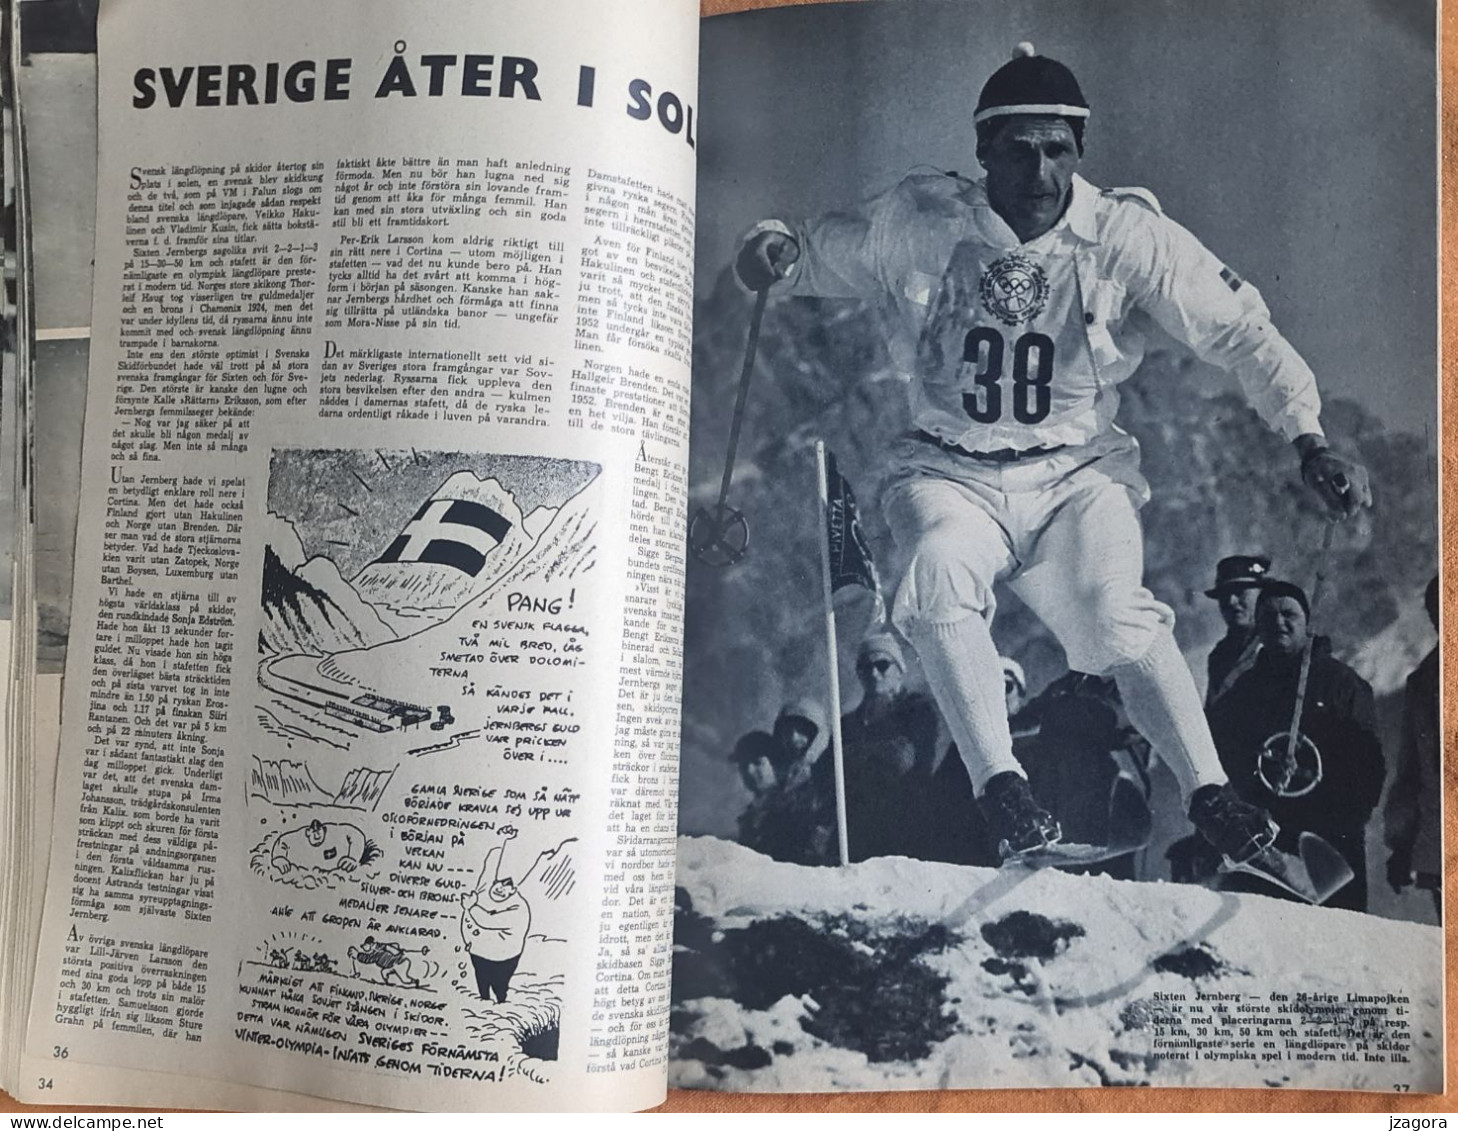 WINTER OLYMPIC GAMES OLYMPISCHE WINTERSPIELE JEUX OLYMPIQUES D'HIVER JUEGOS OLÍMPICOS DE INVIERNO 1956 CORTINA - Libros